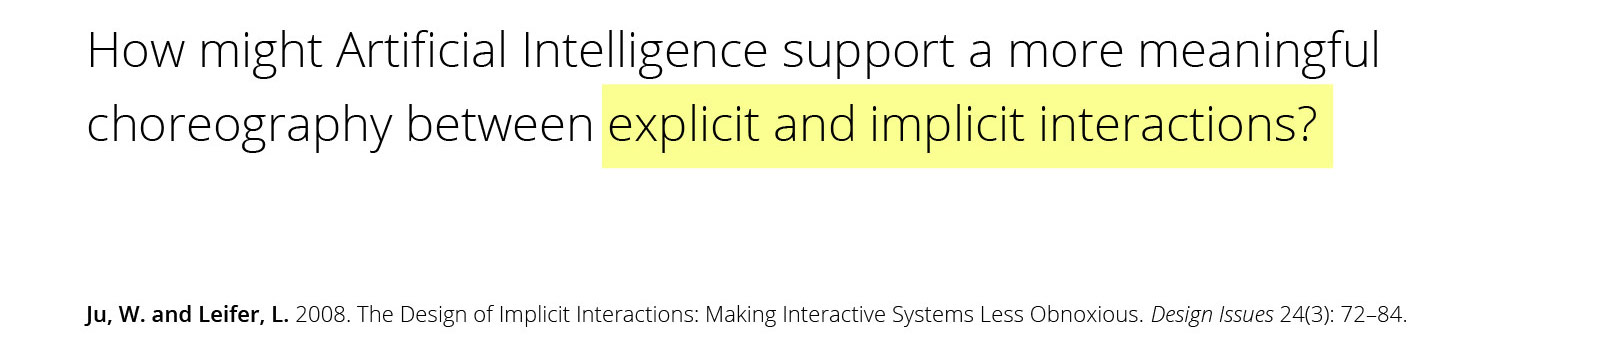 UX of AI presentation - choreography between implicit and explicit interactions